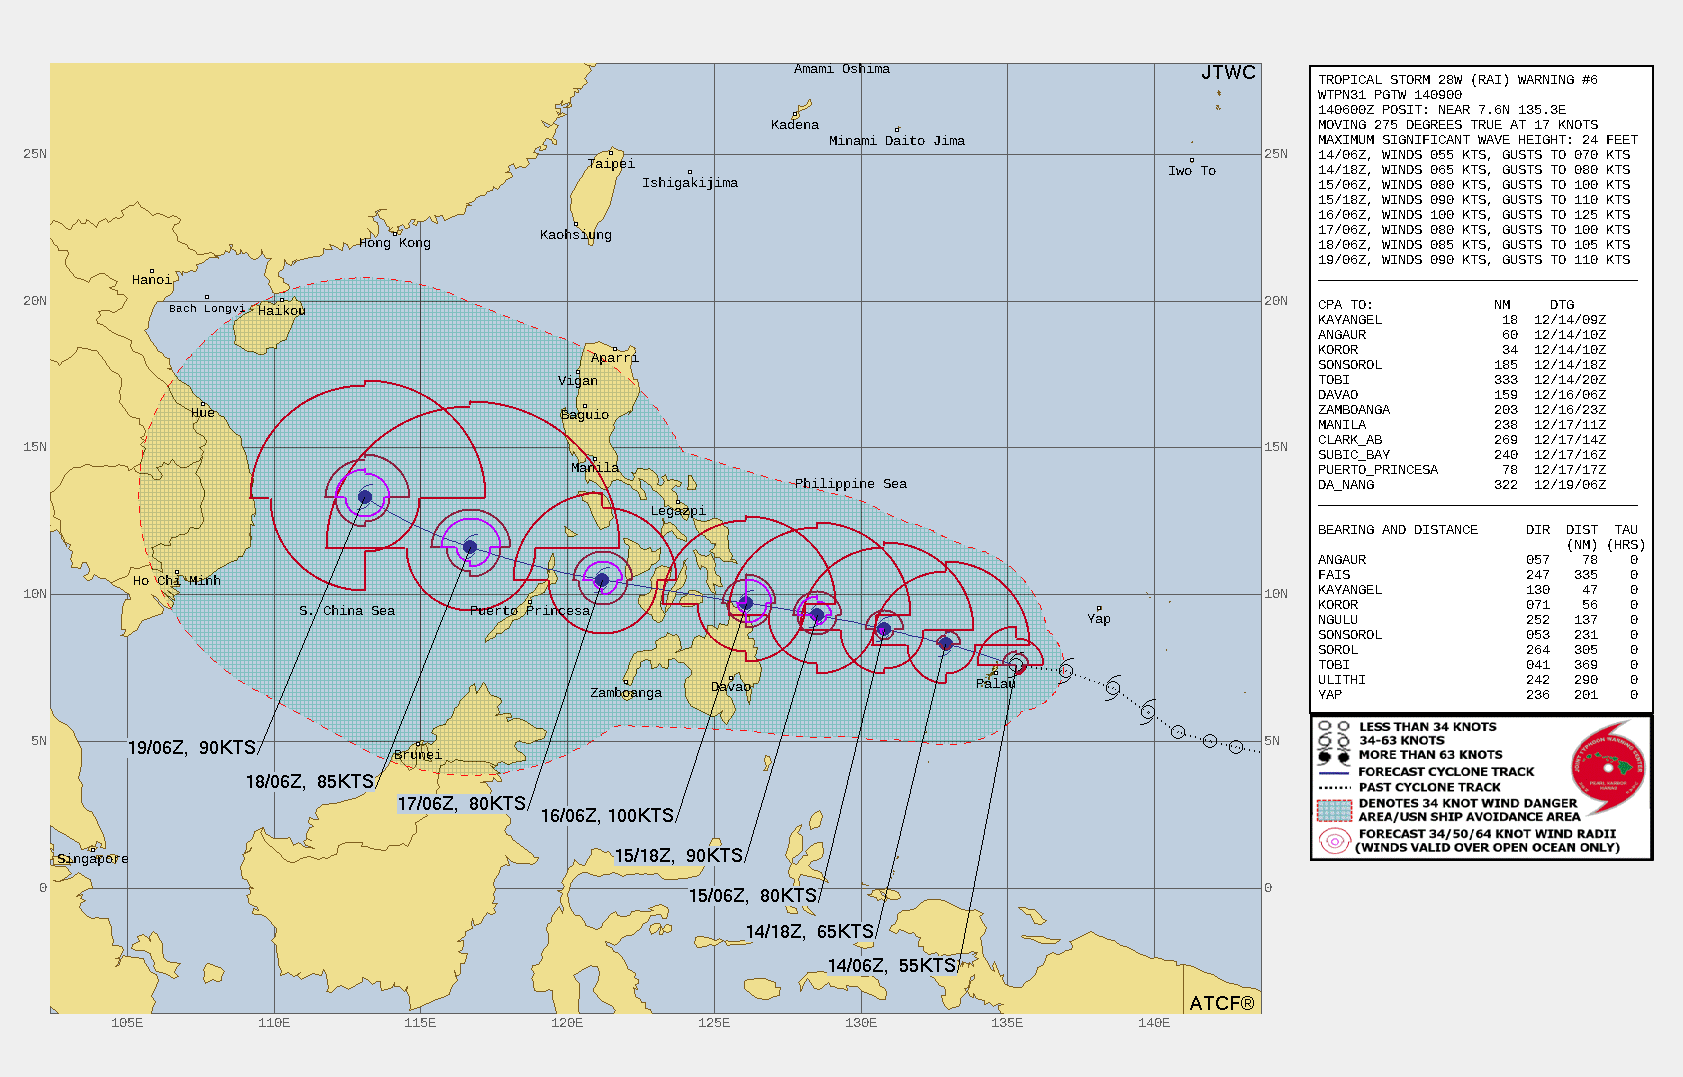 FORECAST REASONING.  SIGNIFICANT FORECAST CHANGES: THERE ARE NO SIGNIFICANT CHANGES TO THE FORECAST FROM THE PREVIOUS WARNING.  FORECAST DISCUSSION: TS RAI WILL CONTINUE ON ITS CURRENT TRACK, MAKING LANDFALL OVER NORTHERN MINDANAO, PHILIPPINES, NEAR 48H, DRAG ACROSS THE ARCHIPELAGO, AND EXIT INTO THE SOUTH CHINA SEA (SCS) AFTER 72H. THE FAVORABLE ENVIRONMENT WILL FUEL GRADUAL THEN RAPID INTENSIFICATION TO A PEAK OF 100KTS/CAT 3 BY 48H. AFTERWARD,  INTERACTION WITH THE PHILIPPINE ISLANDS WILL ERODE THE SYSTEM TO  85KTS AS IT EXITS INTO THE SCS. THE WARM SST IN THE SCS AND  CONTINUED LOW VWS, AND GOOD POLEWARD OUTFLOW WILL PROMOTE A  SECONDARY INTENSIFICATION TO 90KTS/CAT 2 BY 120H.